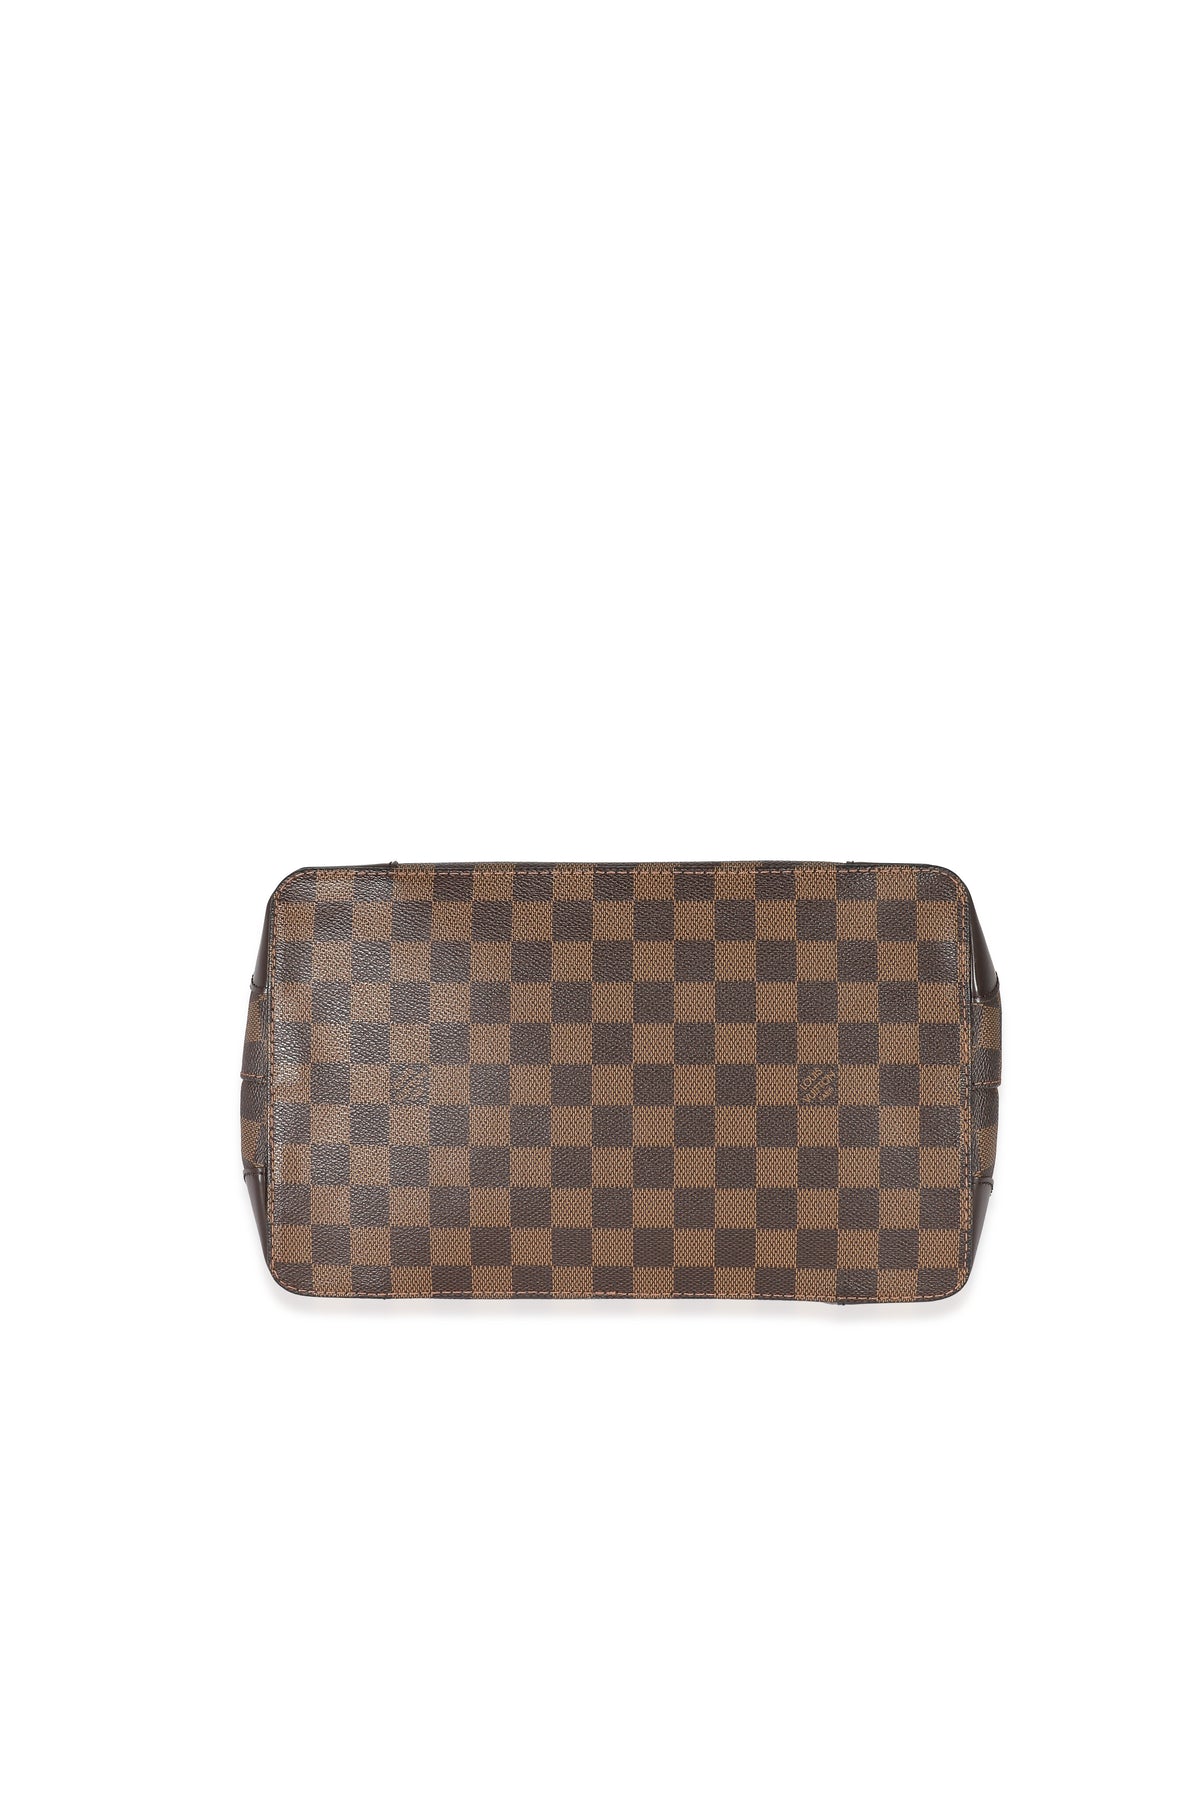 LOUIS VUITTON Hampstead PM Damier Ebene Brown Canvas in United States